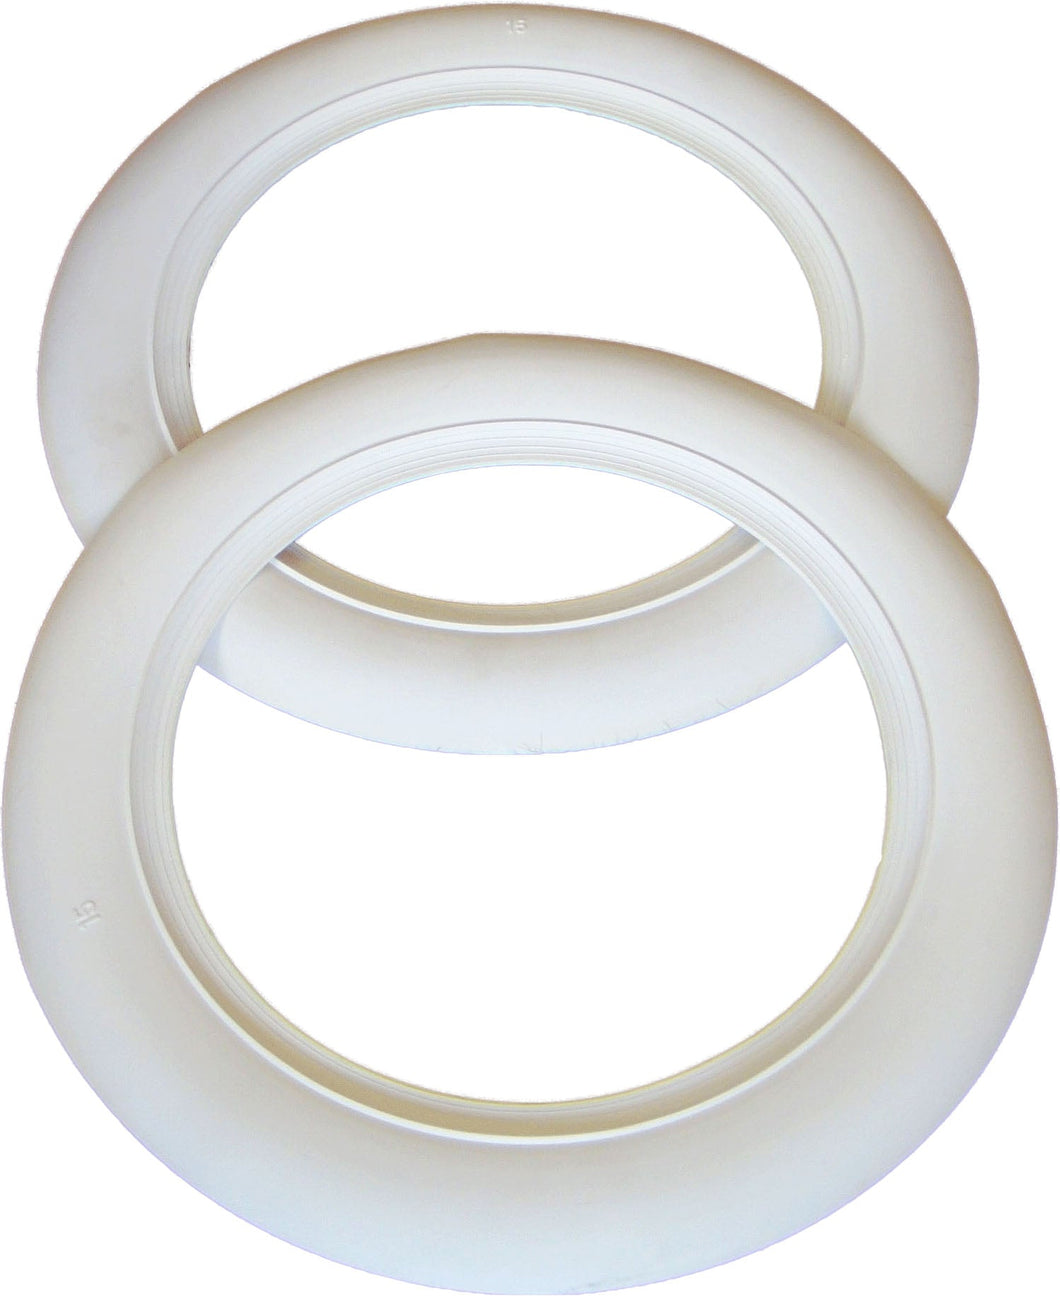 2 x 17'' Atlas Whitewall Inserts (set of 2) - 1 1/2'' (45mm) wide